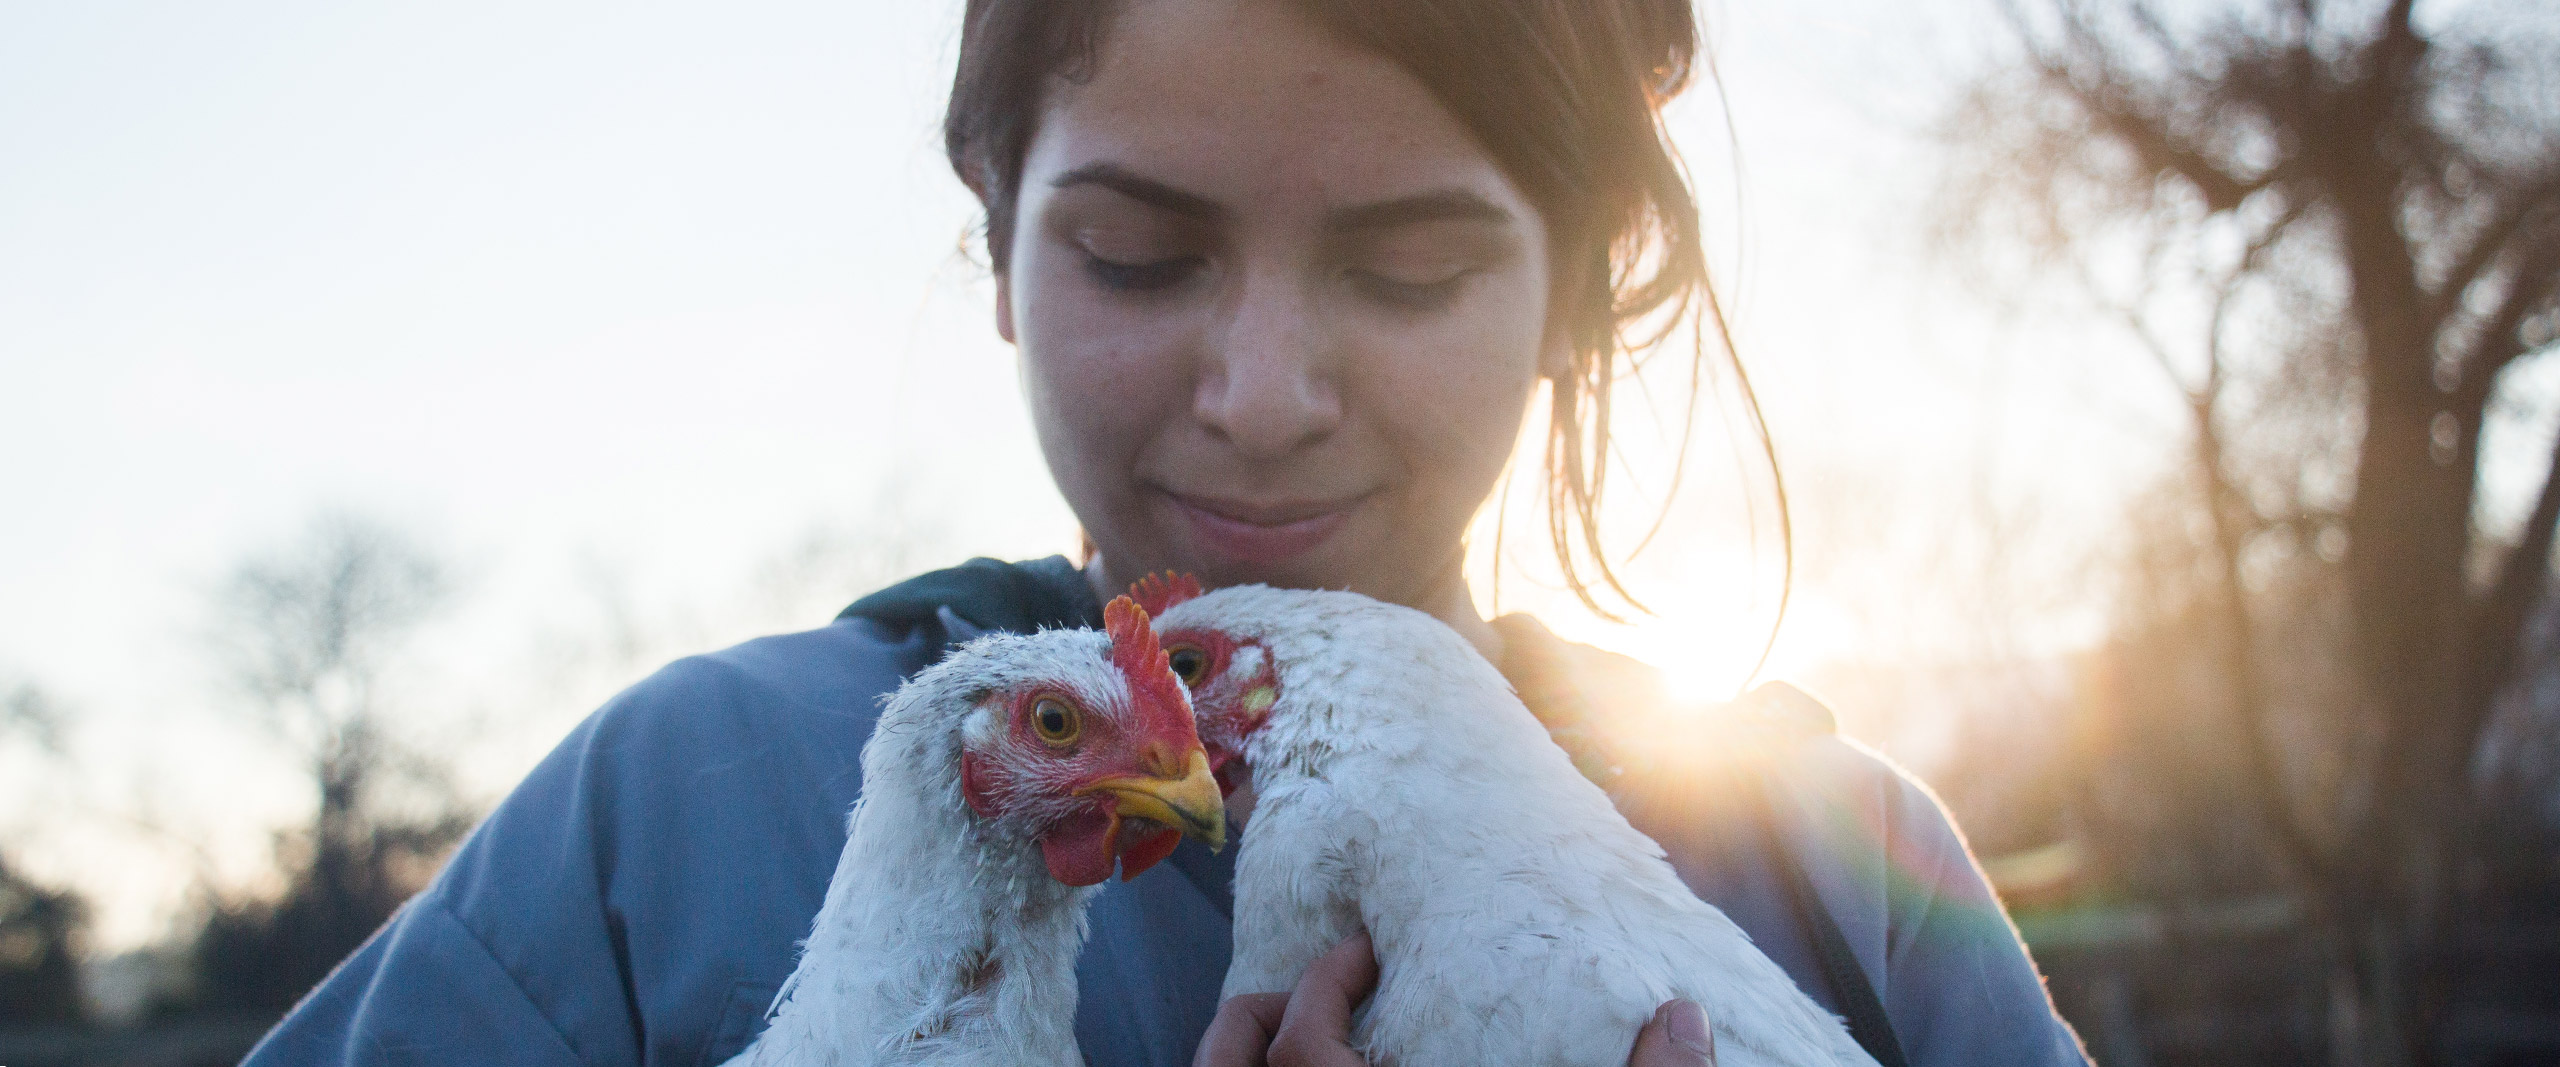 Girl with rescued hens